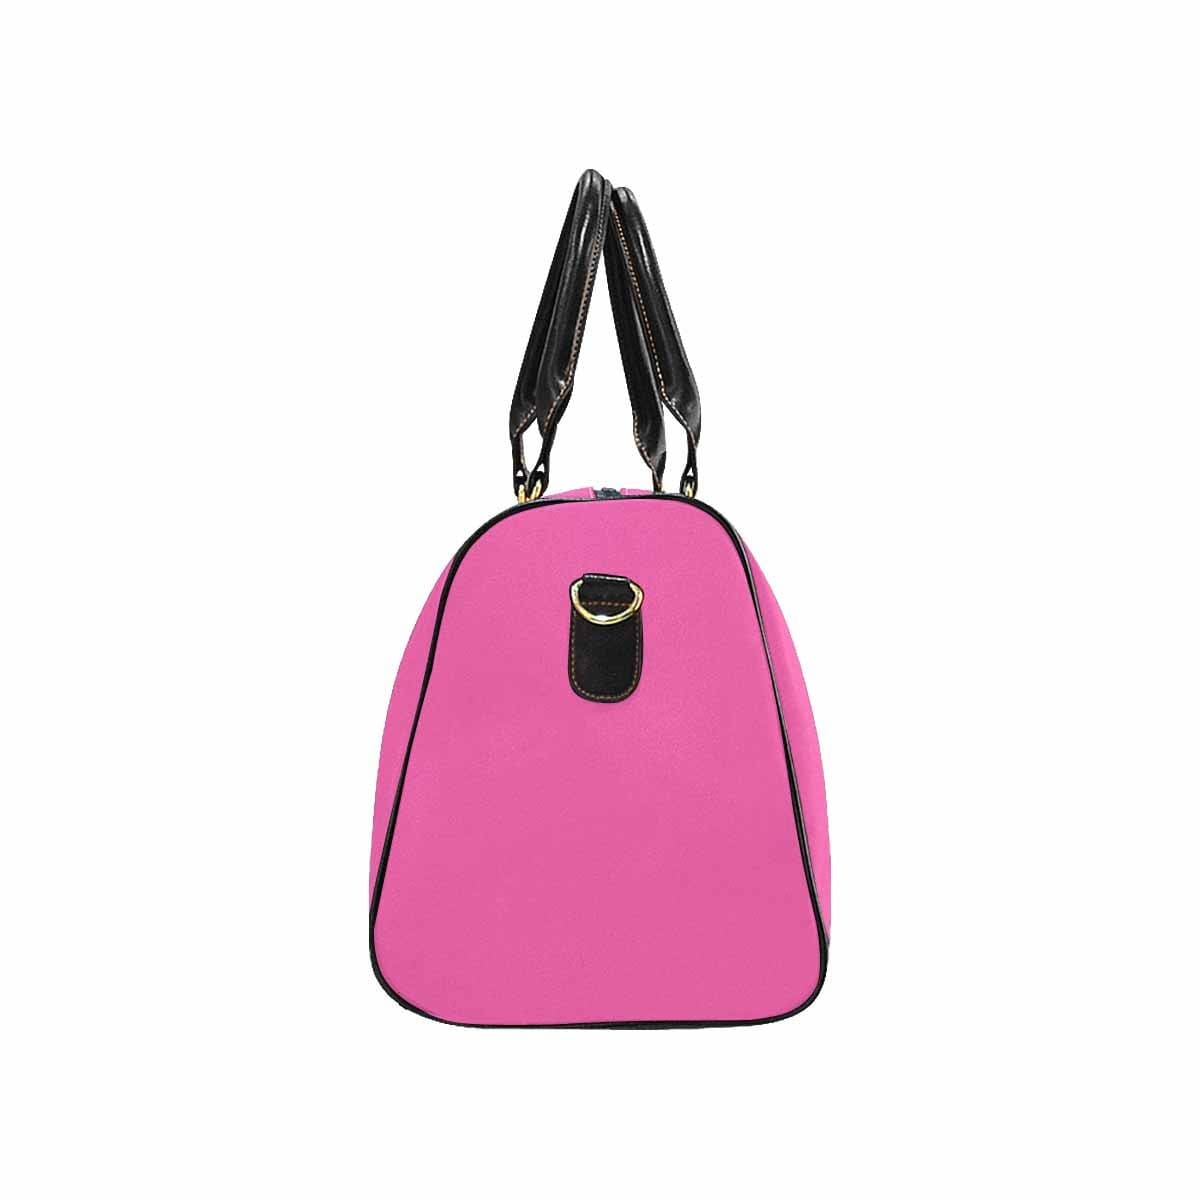 Travel Bag Leather Carry On Large Luggage Bag Hot Pink - Bags | Travel Bags |